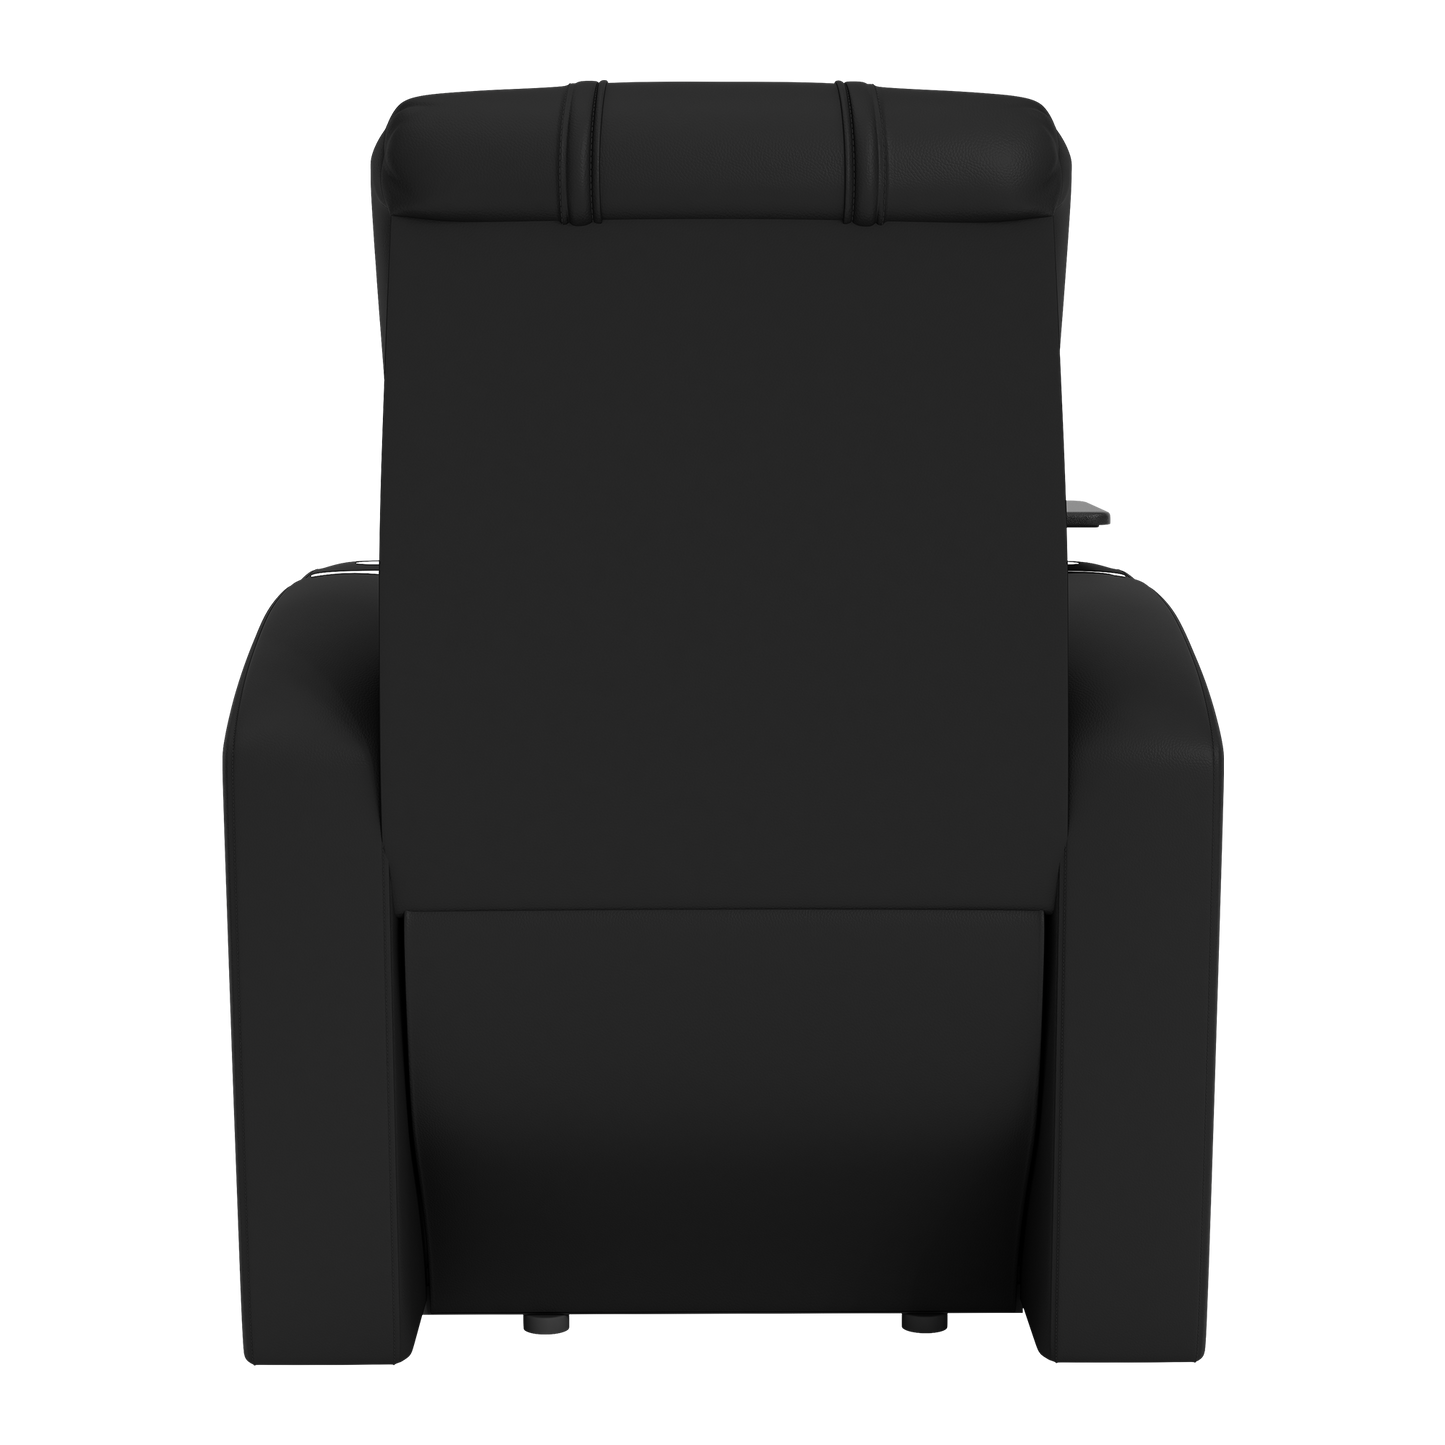 Stealth Power Plus Recliner with Stanford Cardinals Logo